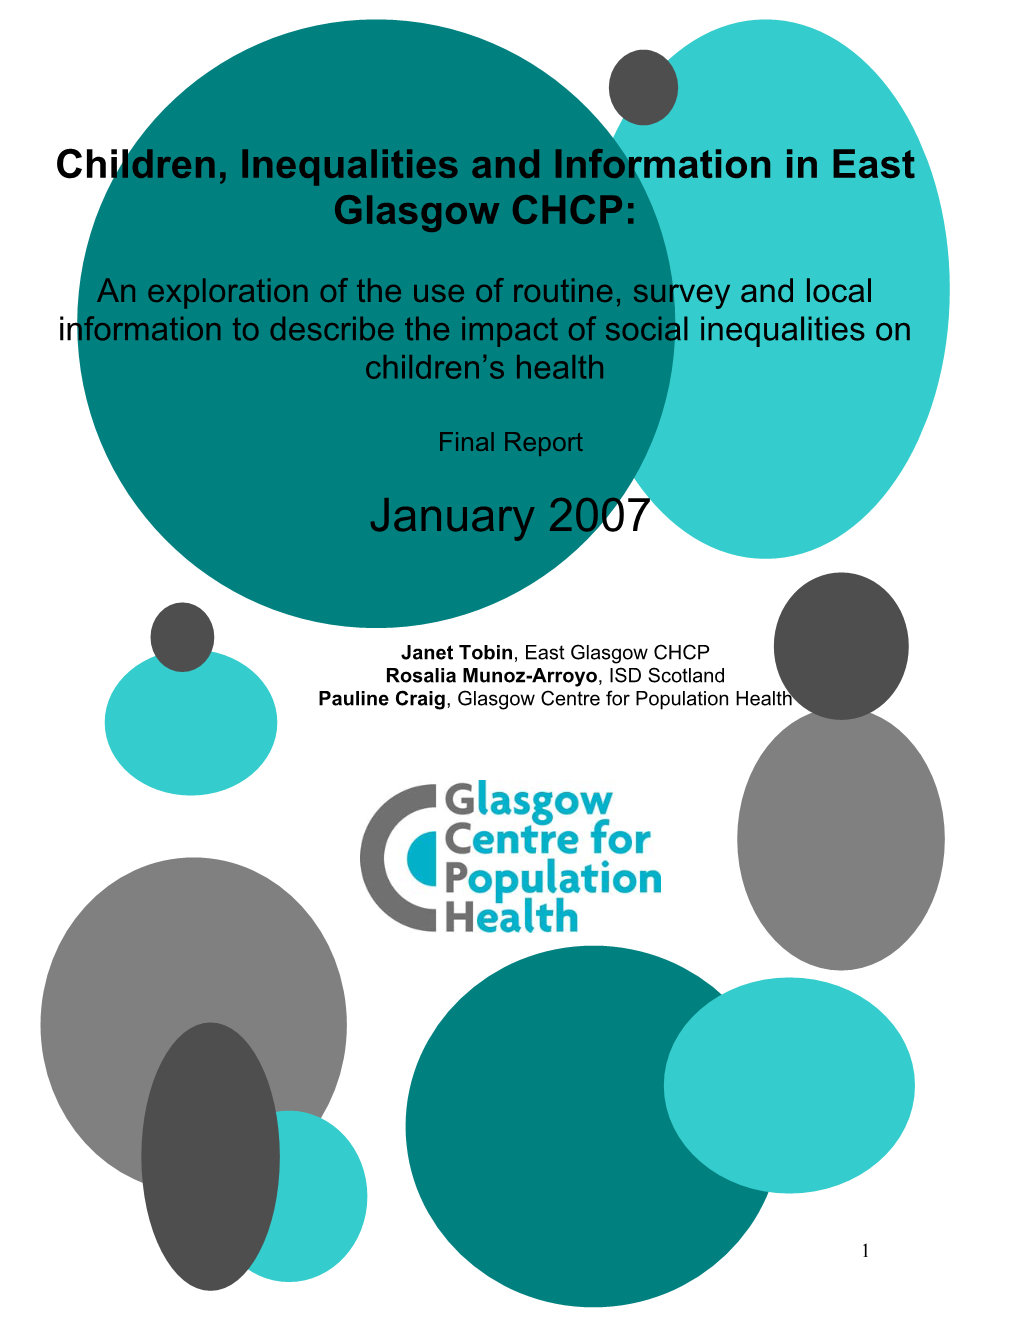 Format for Children Inequalities and Information in East CHCP Report